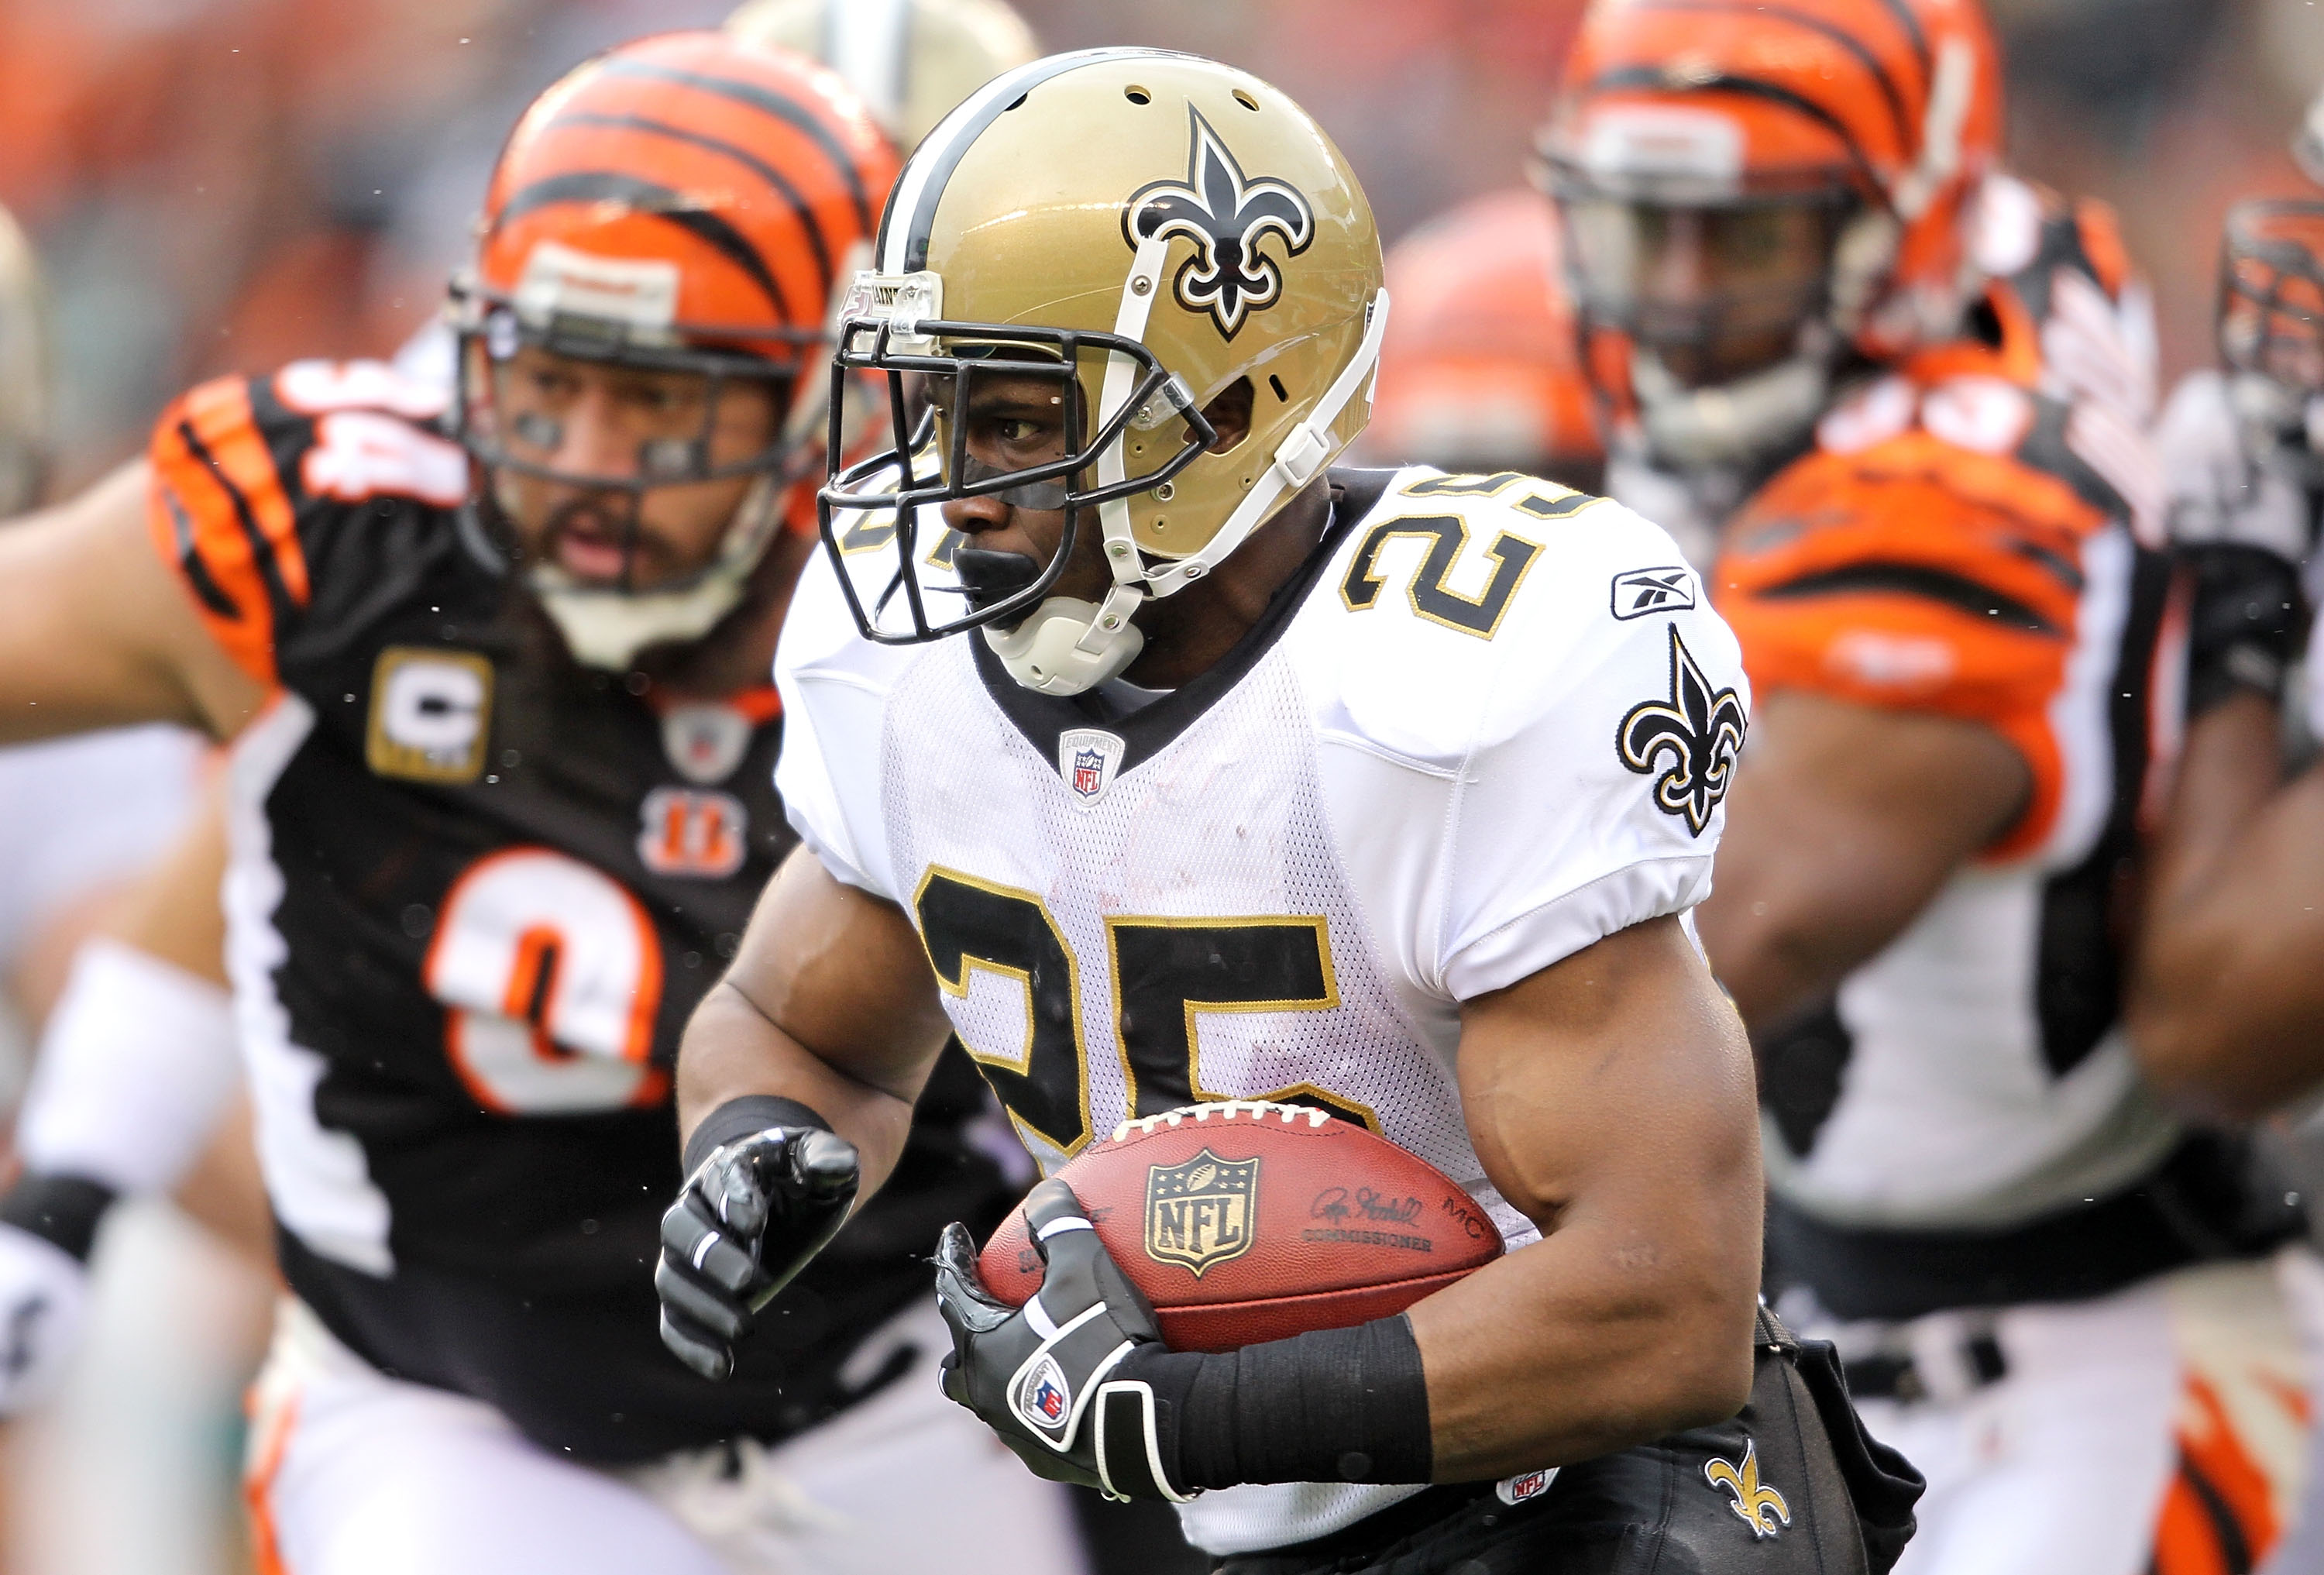 CINCINNATI, OH - DECEMBER 05:  Reggie Bush #25 of the New Orleans Saints runs with the ball during the NFL game against the Cincinnati Bengals at Paul Brown Stadium on December 5, 2010 in Cincinnati, Ohio.  The Saints won 34-30.  (Photo by Andy Lyons/Gett